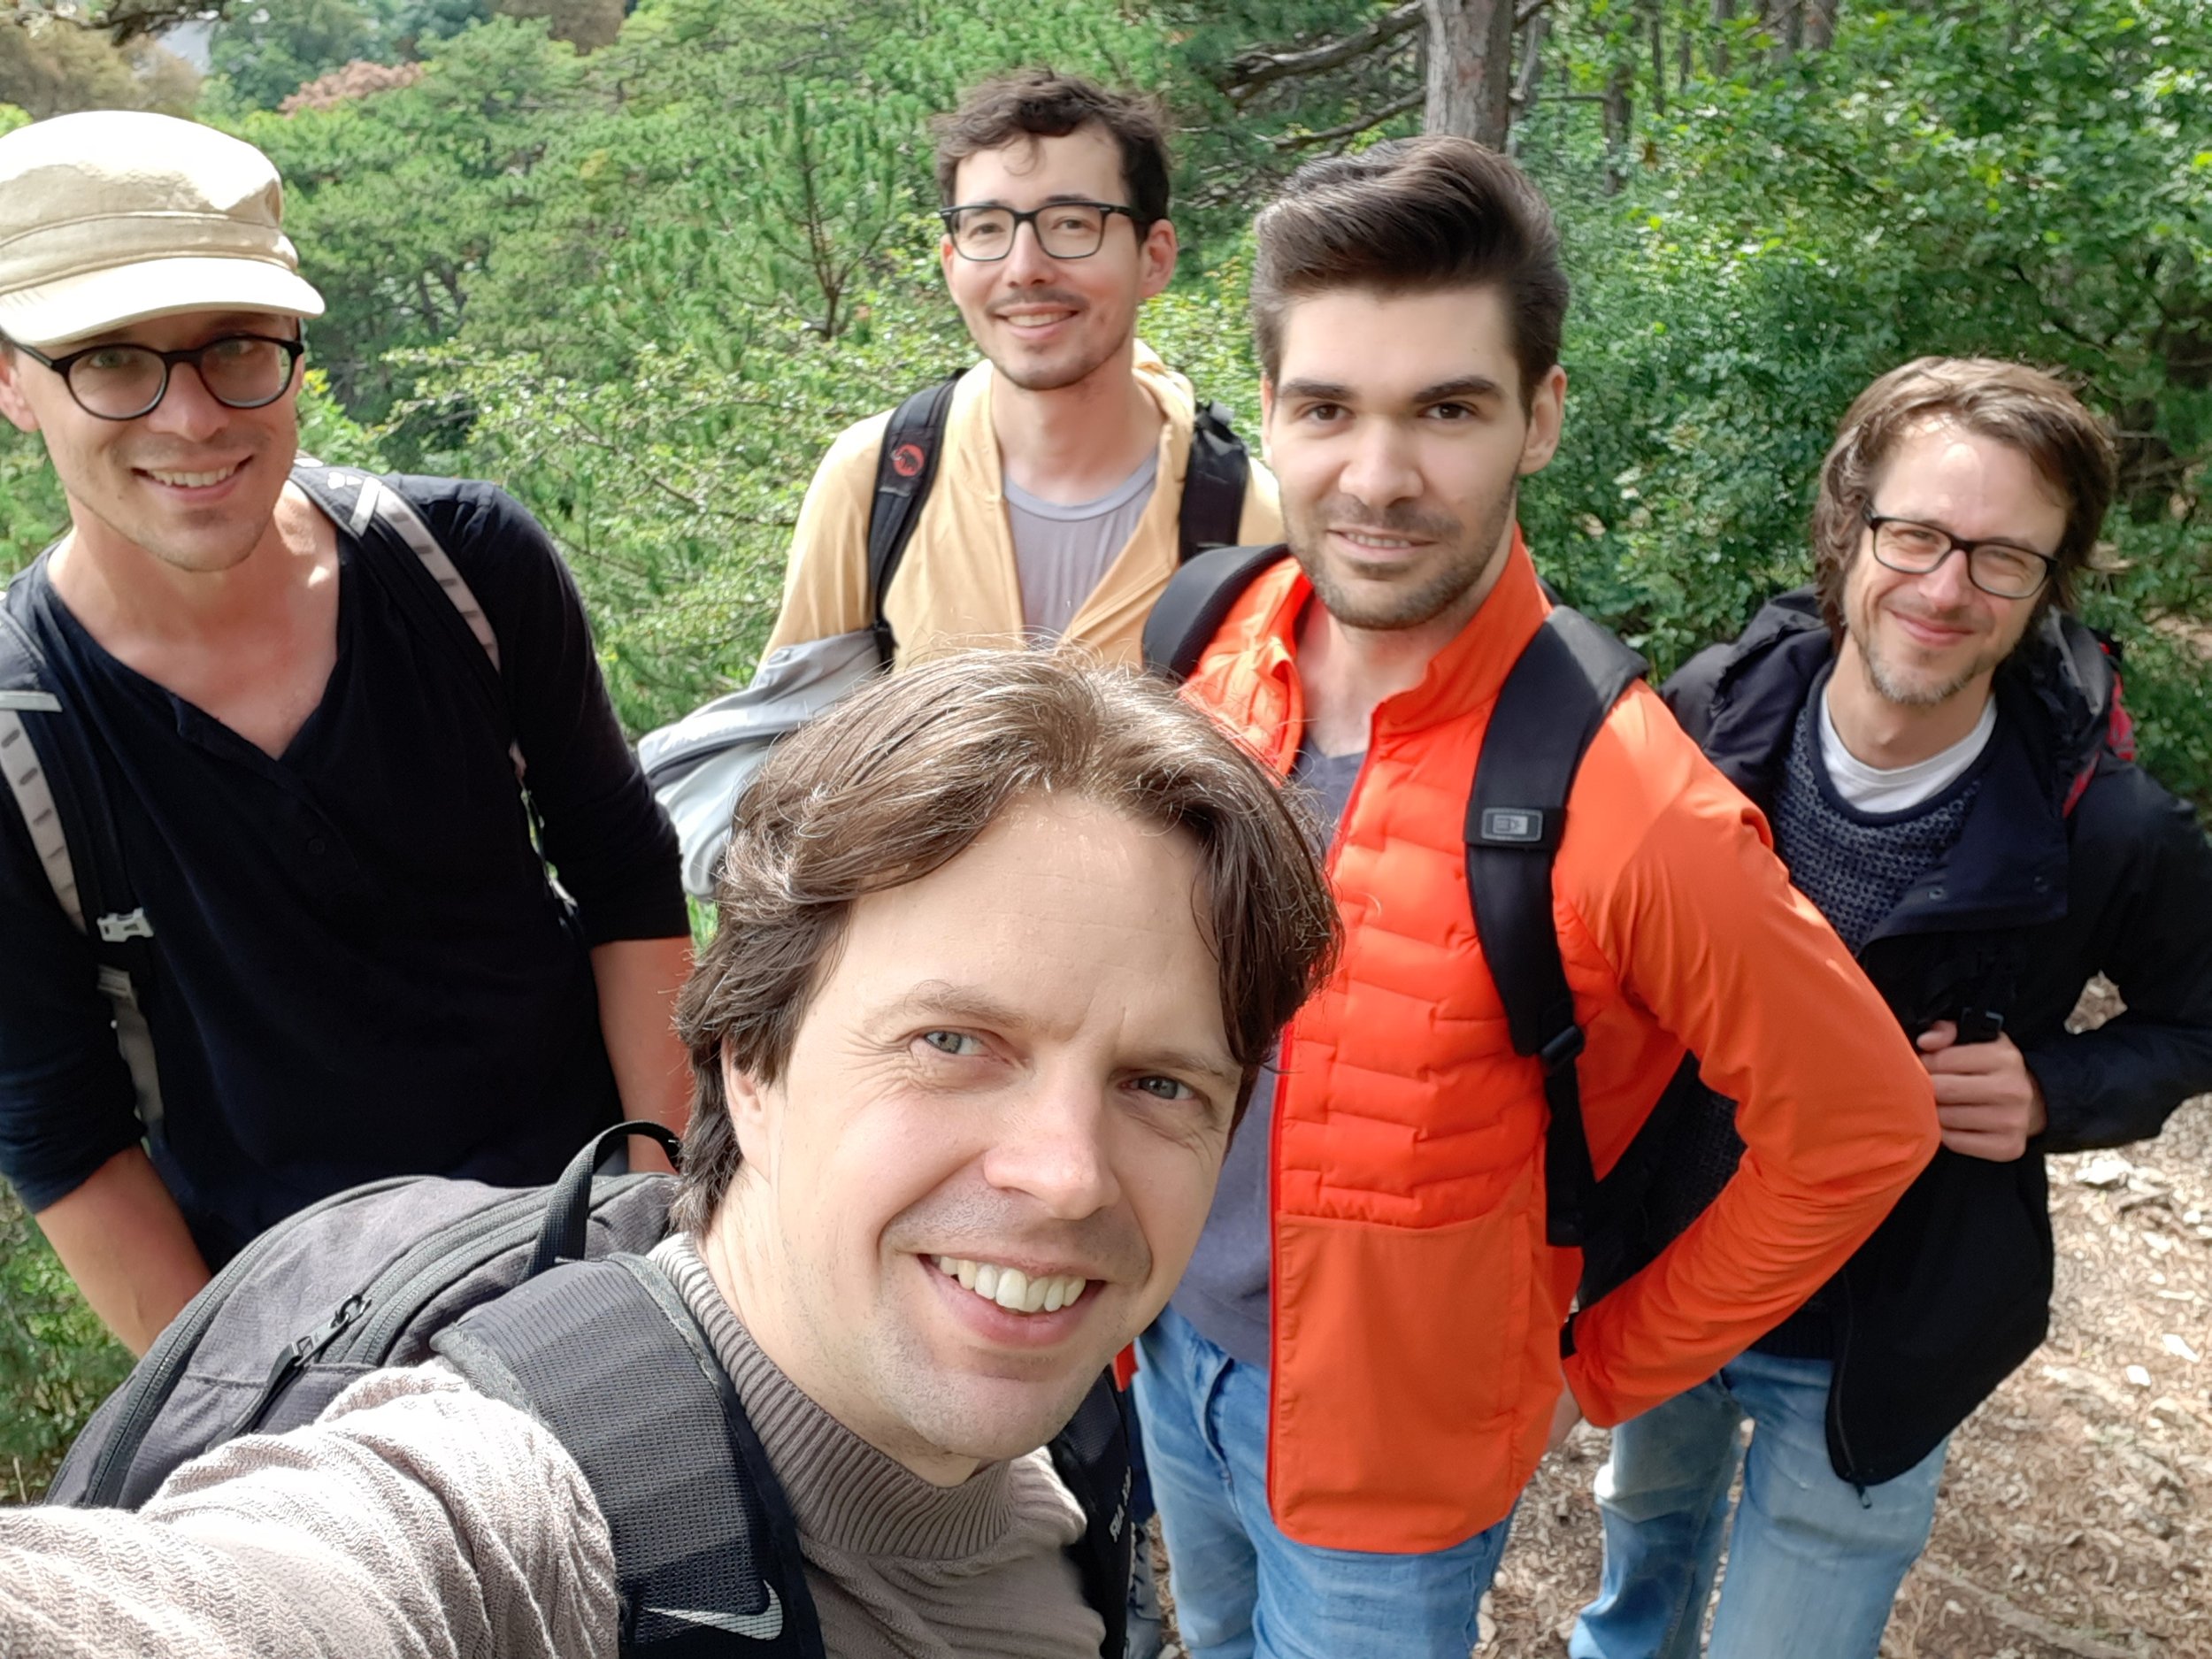 A group of Trustbit employees — Alex, Vadim, Rinat, Oscar and Daniel W — outdoors in a forest, taking a selfie during a company hike